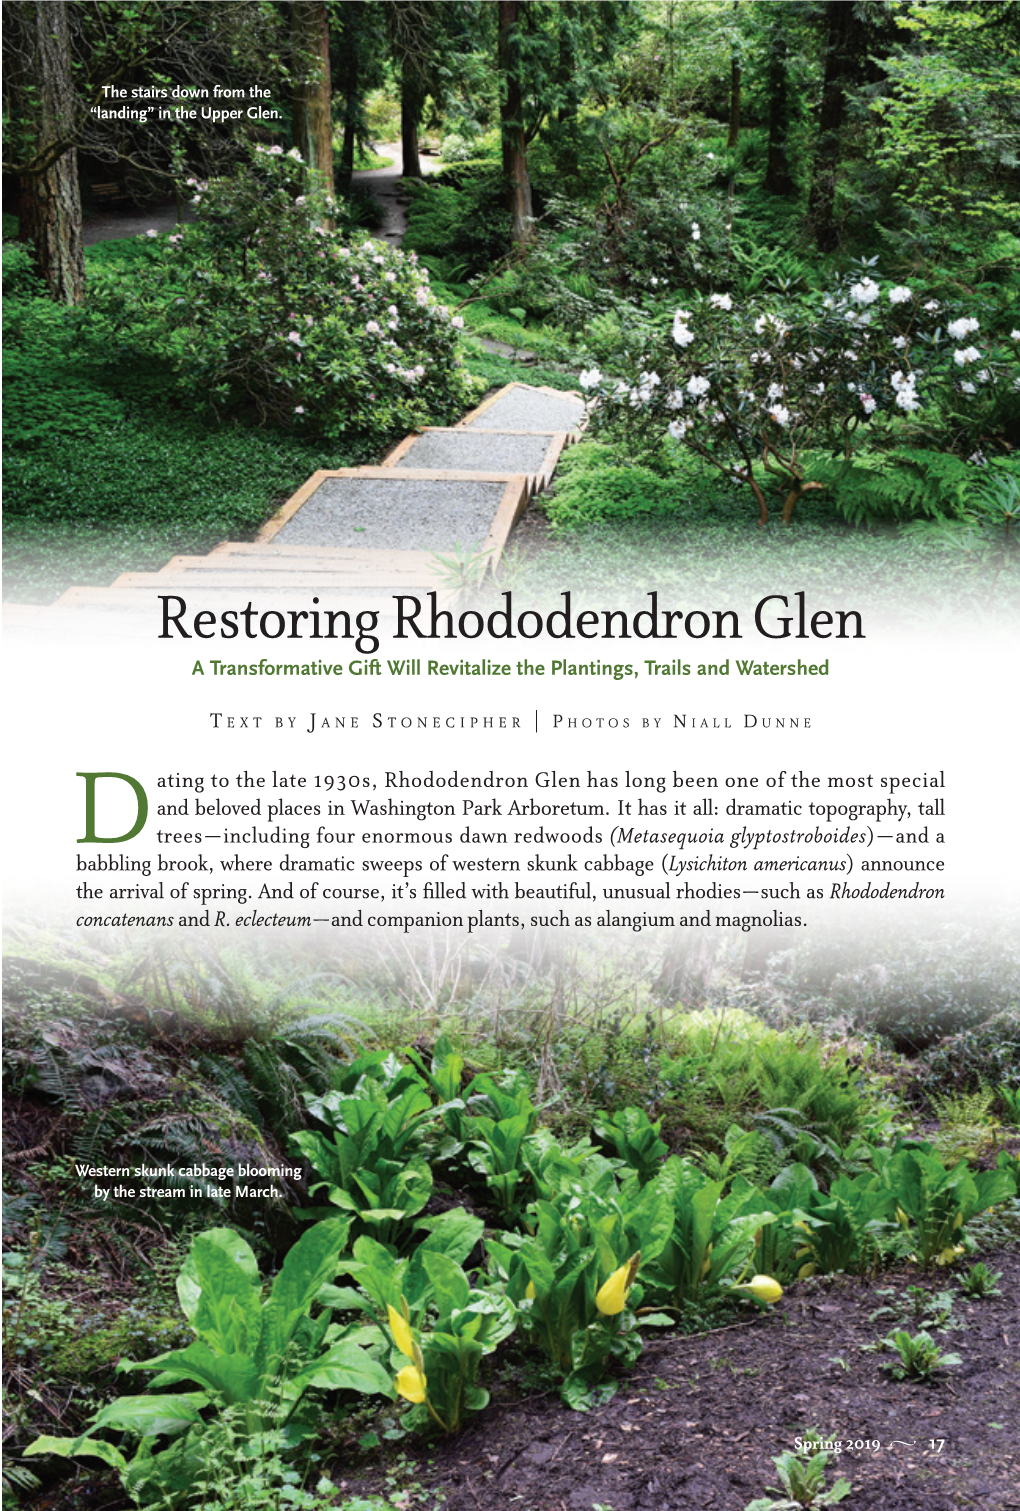 Restoring Rhododendron Glen a Transformative Gift Will Revitalize the Plantings, Trails and Watershed